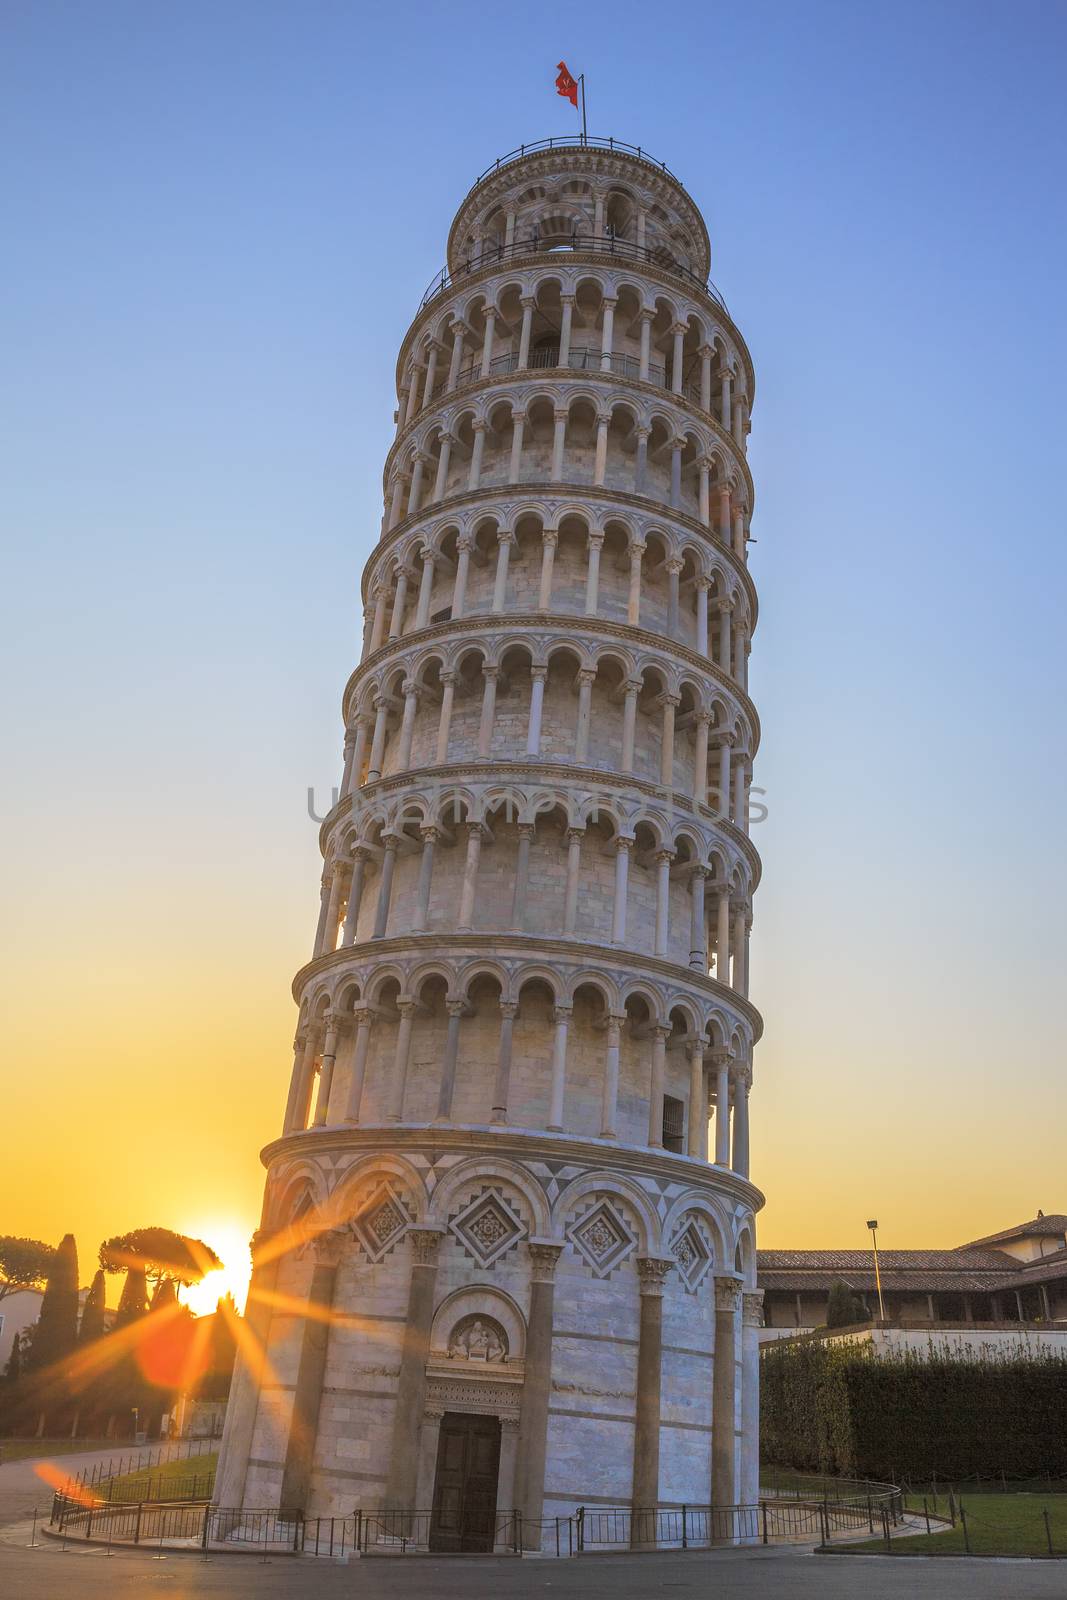 Pisa leaning tower at sunrise by vwalakte